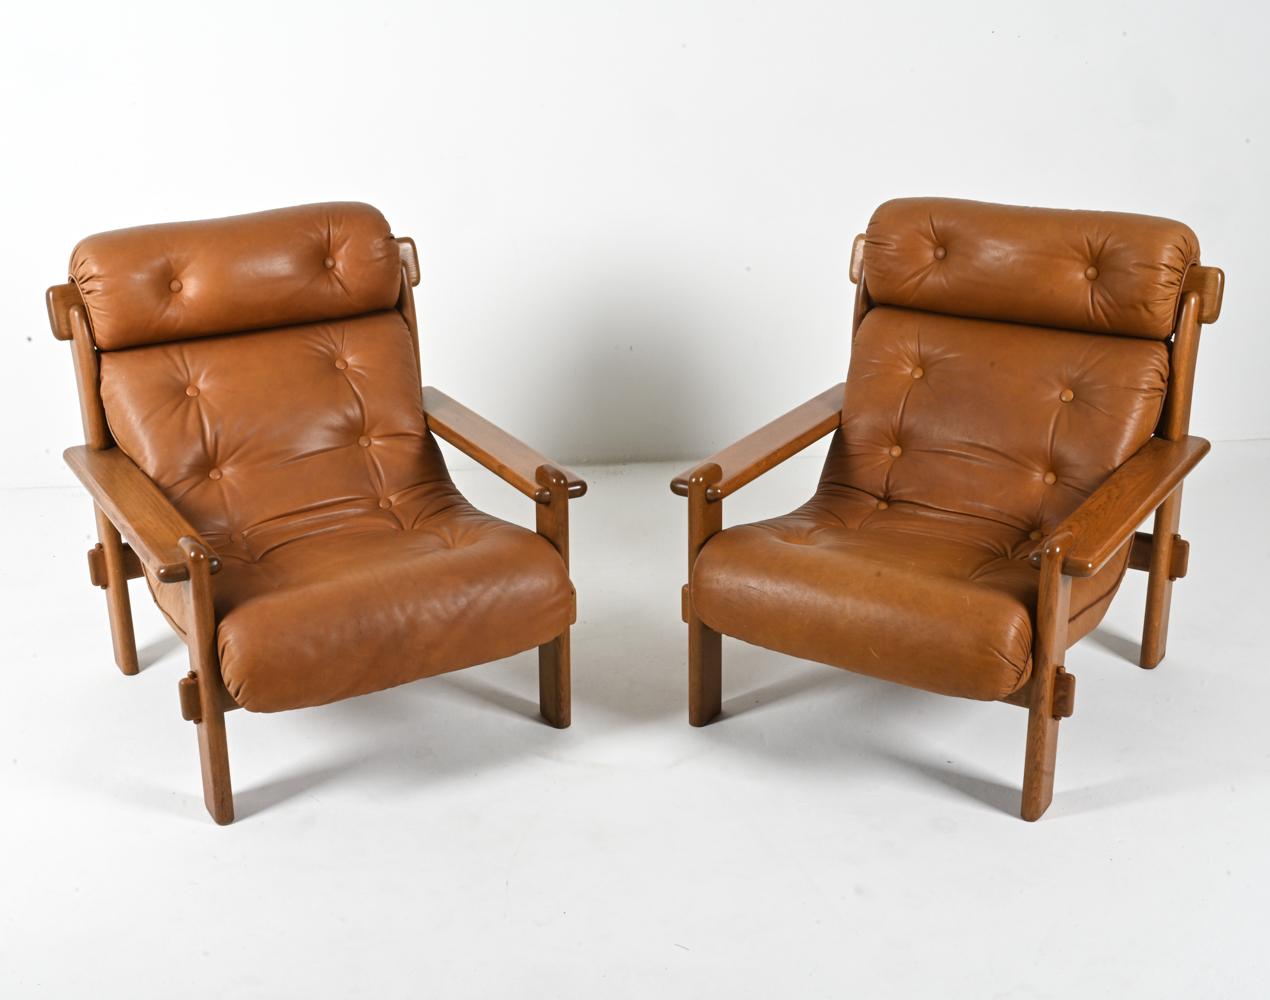 Introducing a stunning pair of Brutalist lounge chairs that effortlessly blend form and function. Crafted in Europe in the 1970s, these chairs boast a substantial frame made from solid oak. The open arms and exaggerated mortise joints add an